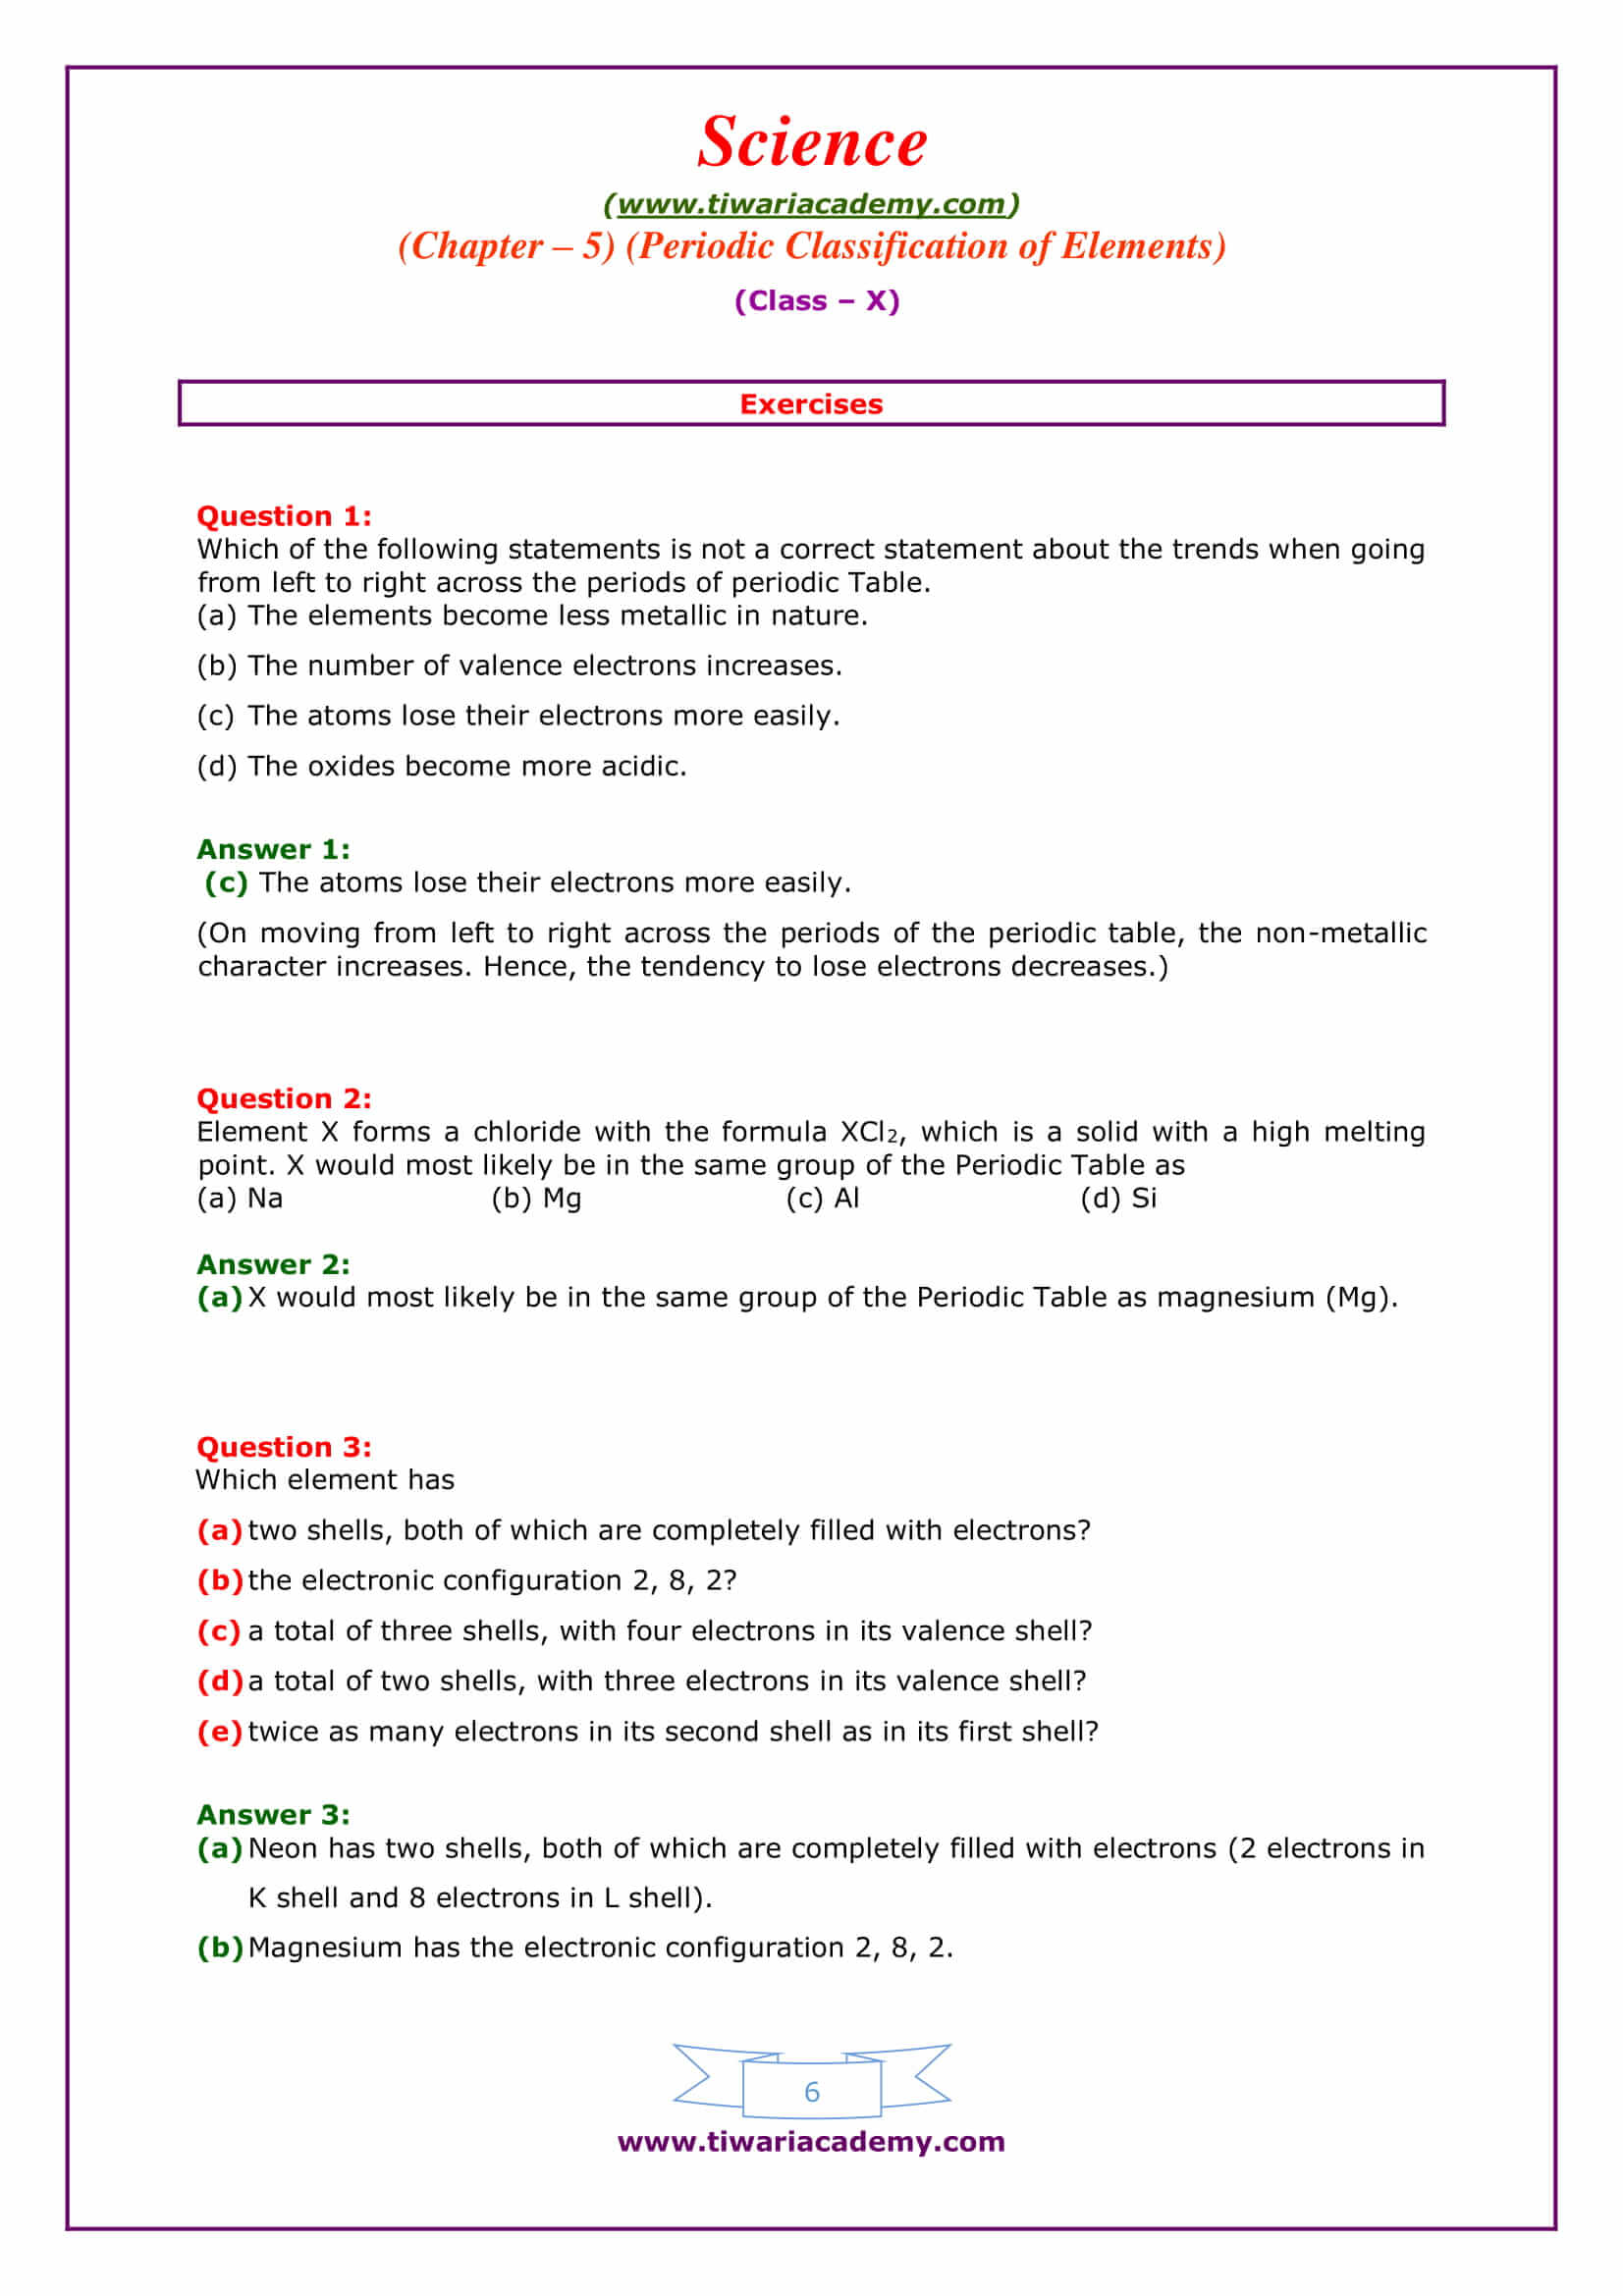 NCERT Solutions for Class 10 Science Chapter 5 Periodic Classification of elements Exercises